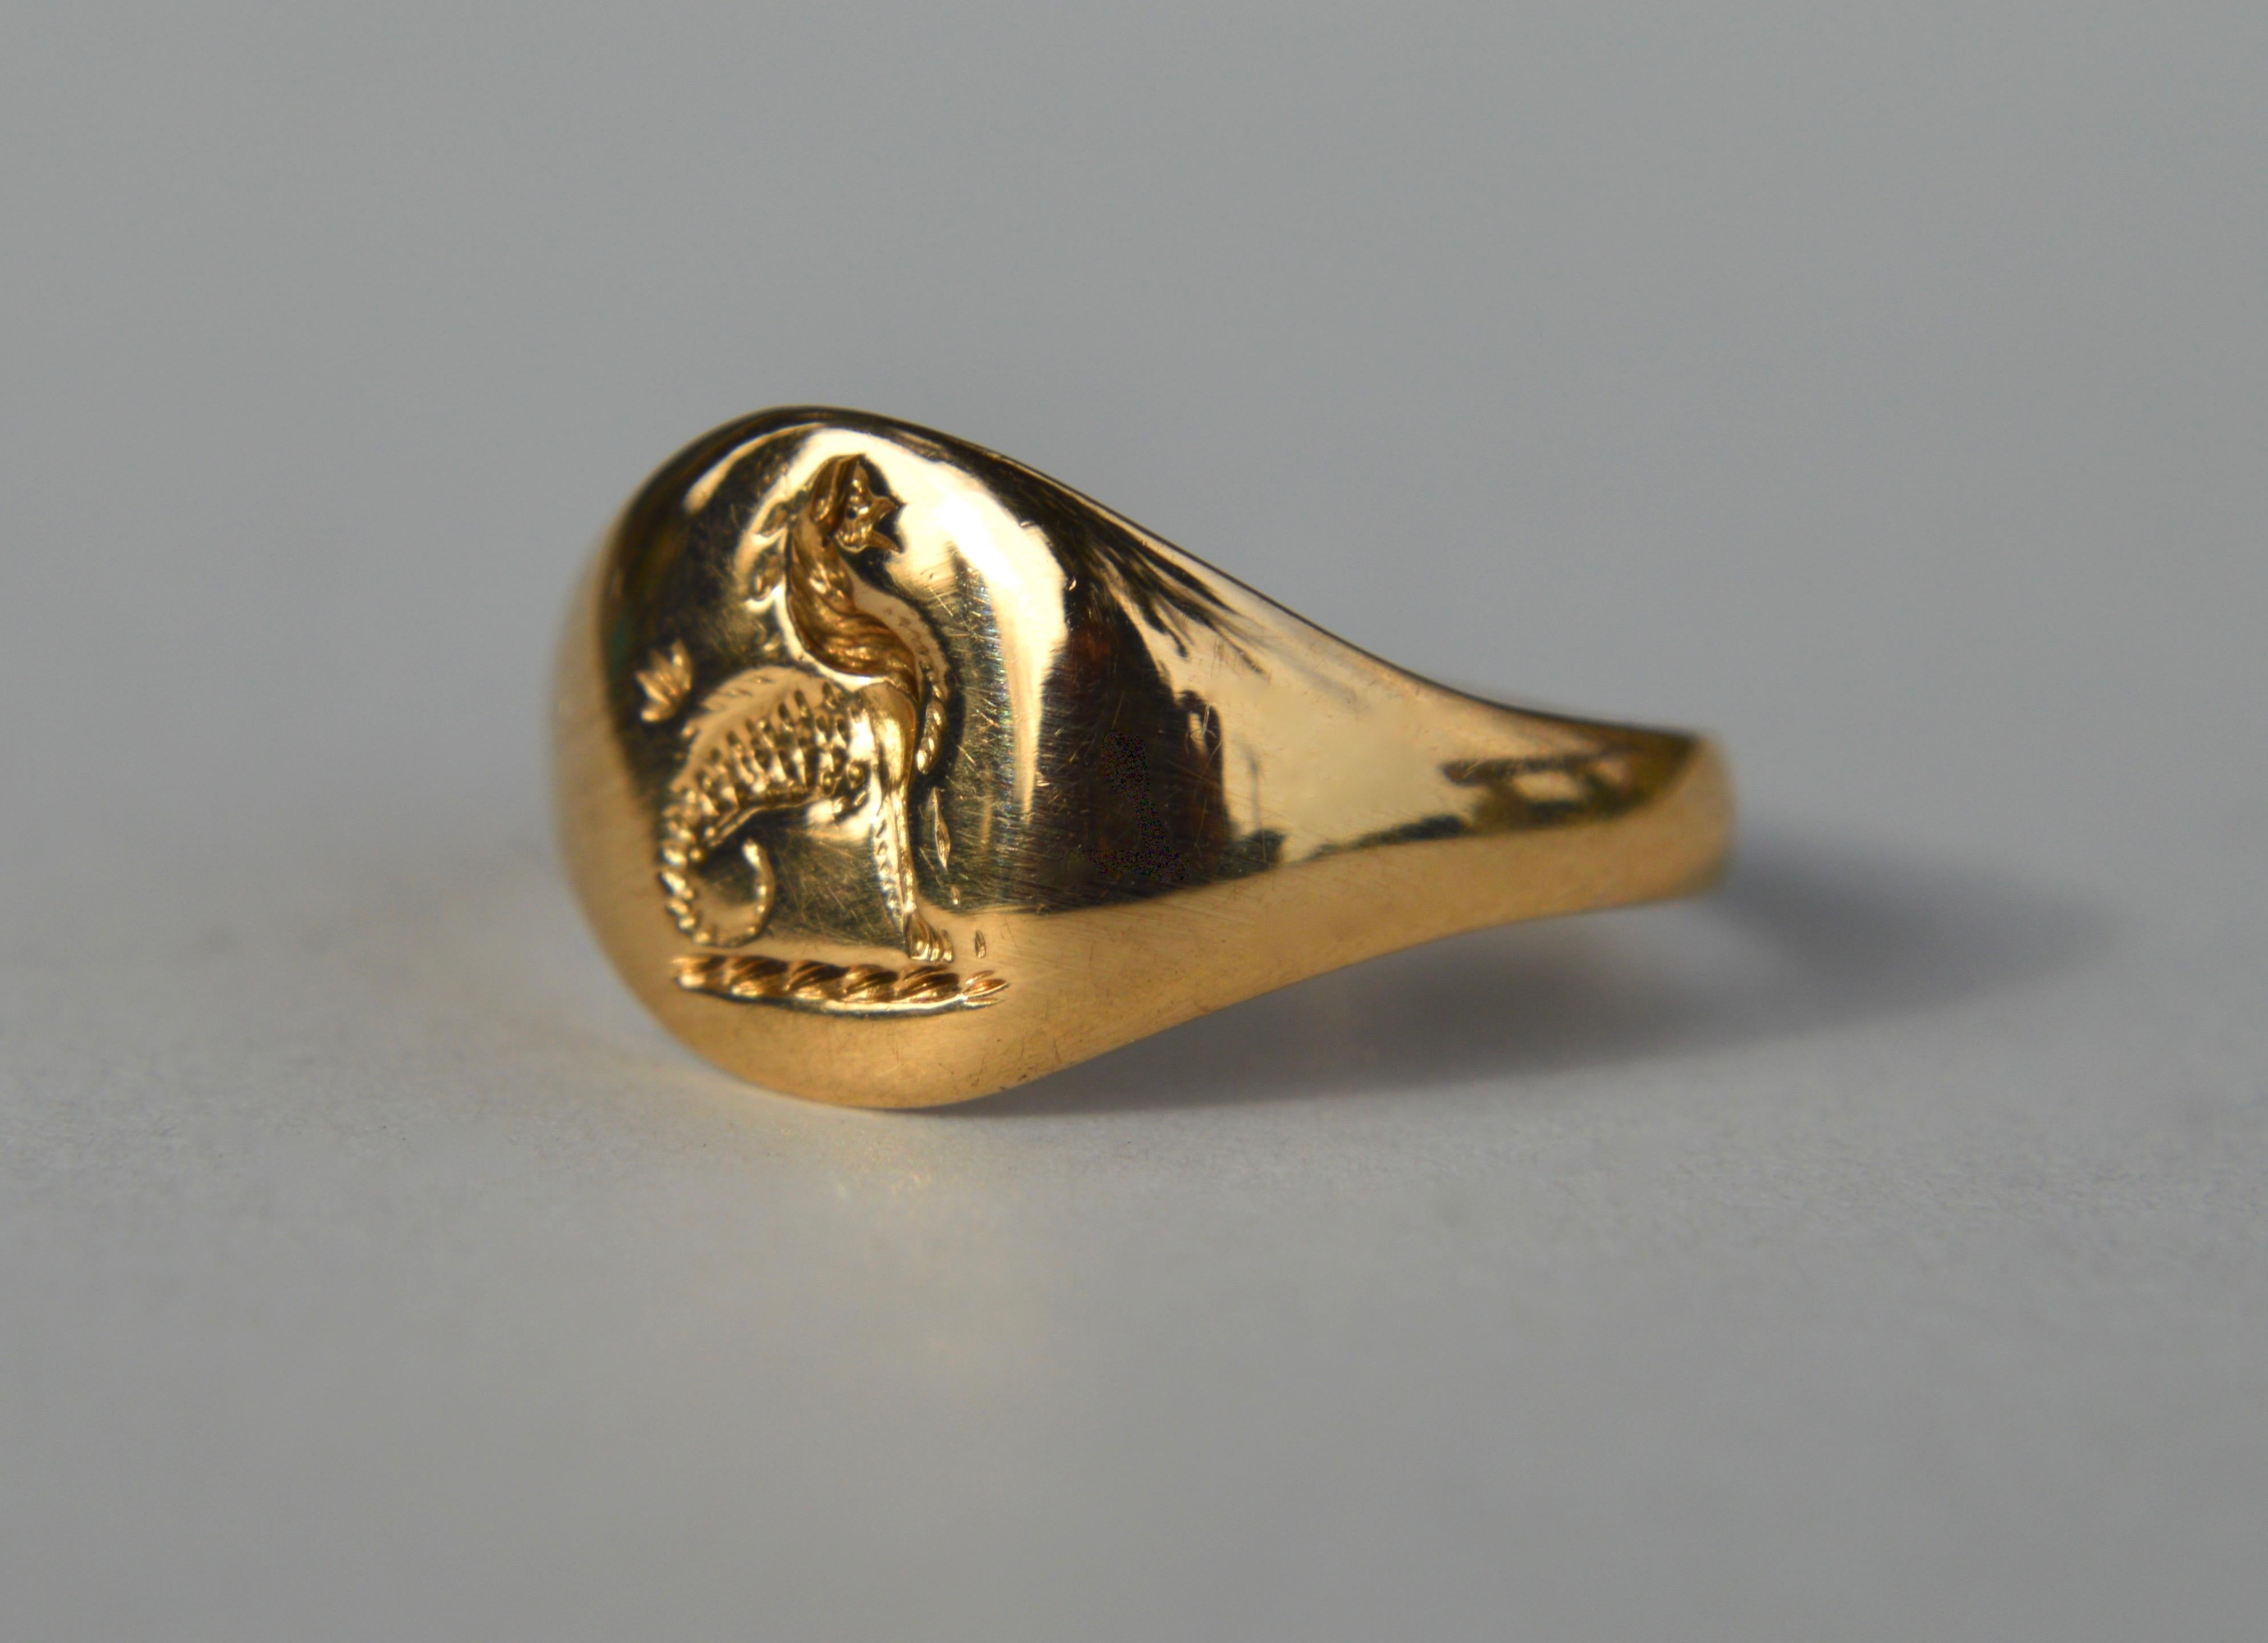 Gorgeous antique Victorian era late 1800s 18K yellow gold signet ring with a griffin, or gryphon emblem. English Birmingham hallmarks, 18K gold mark. Size 5, can be resized by a jeweler. In very good condition. Signet face measures